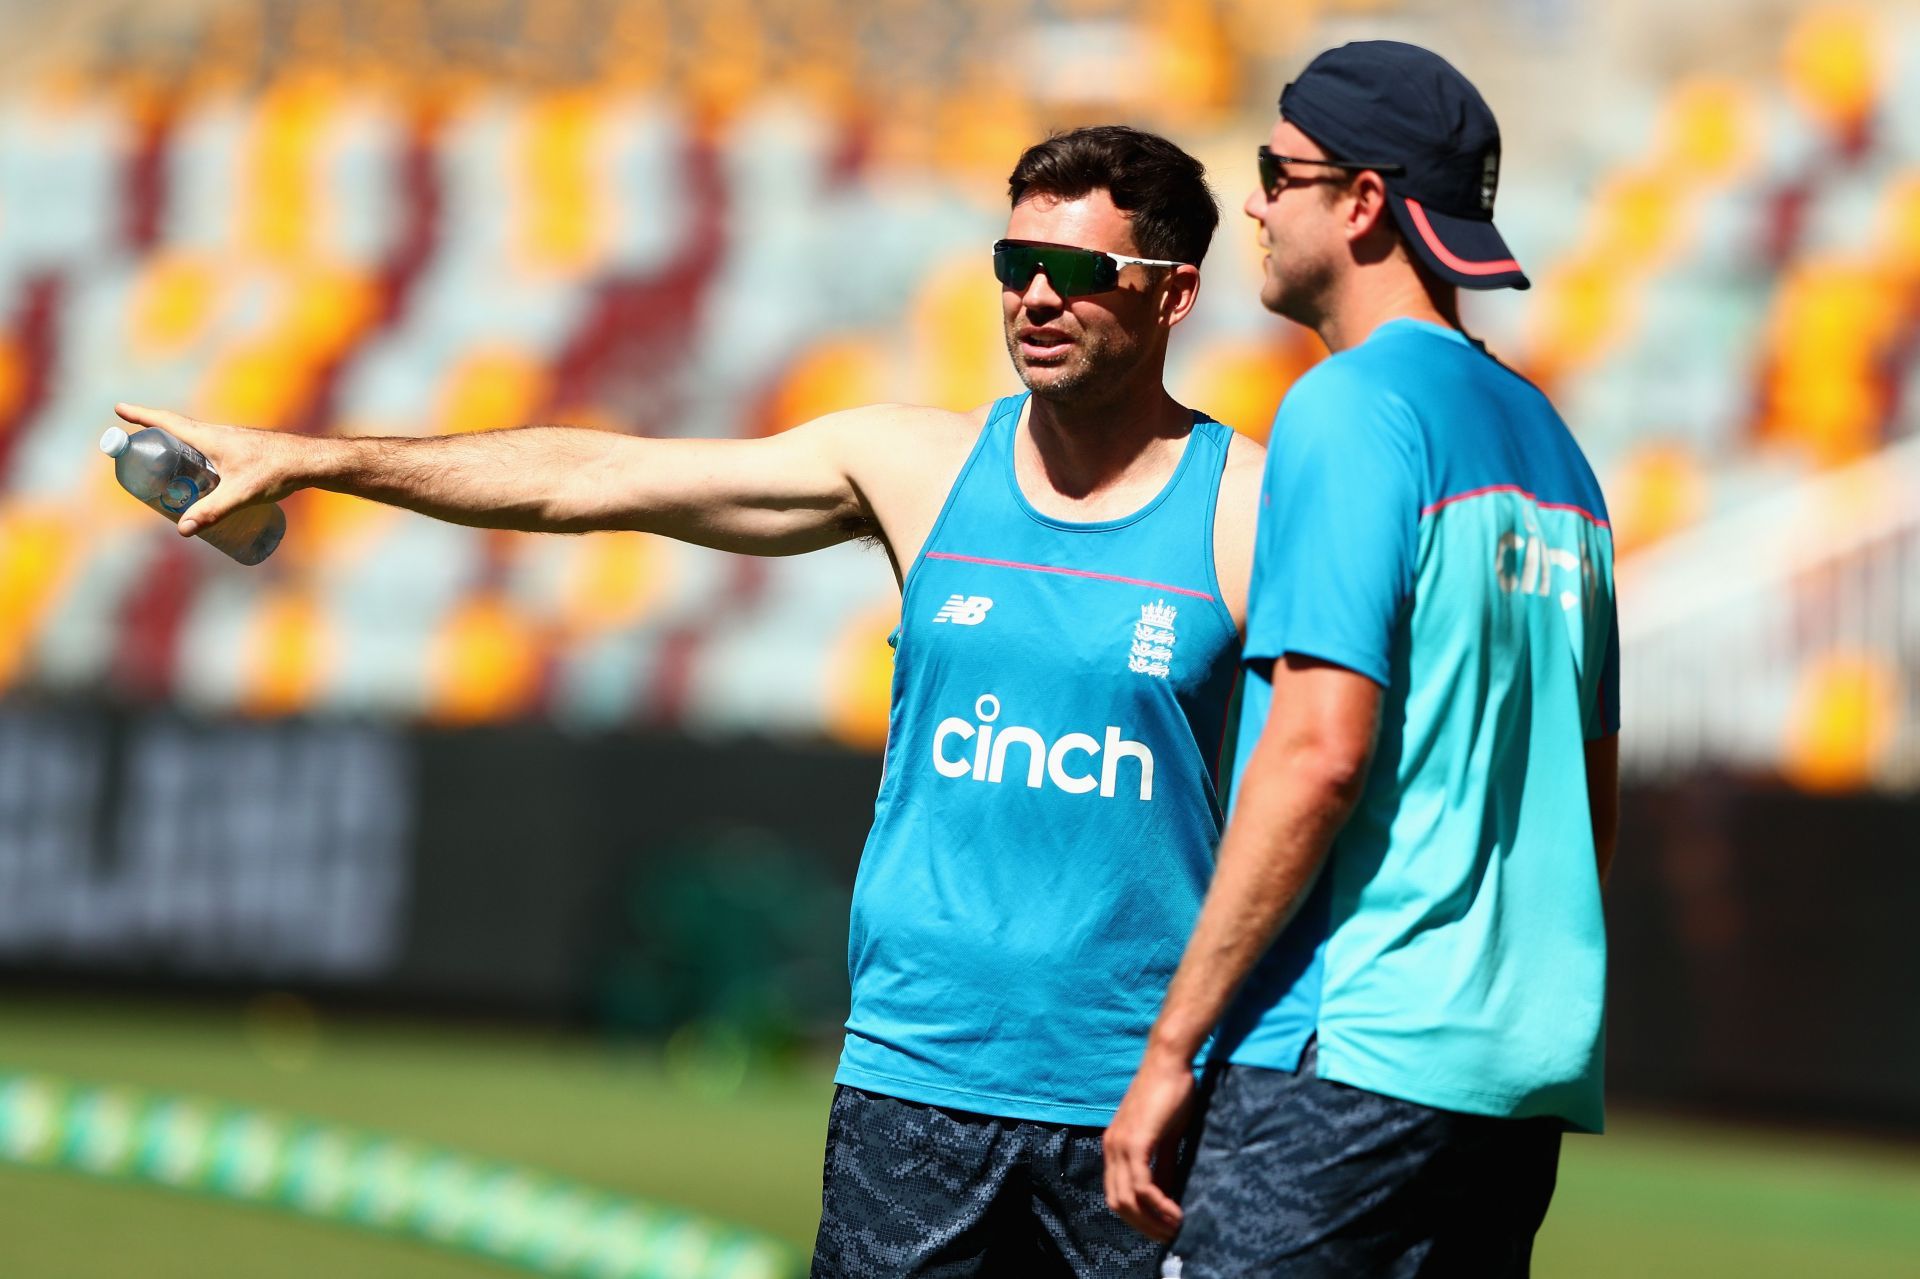 James Anderson and Stuart Broad were omitted from the playing XI at The Gabba